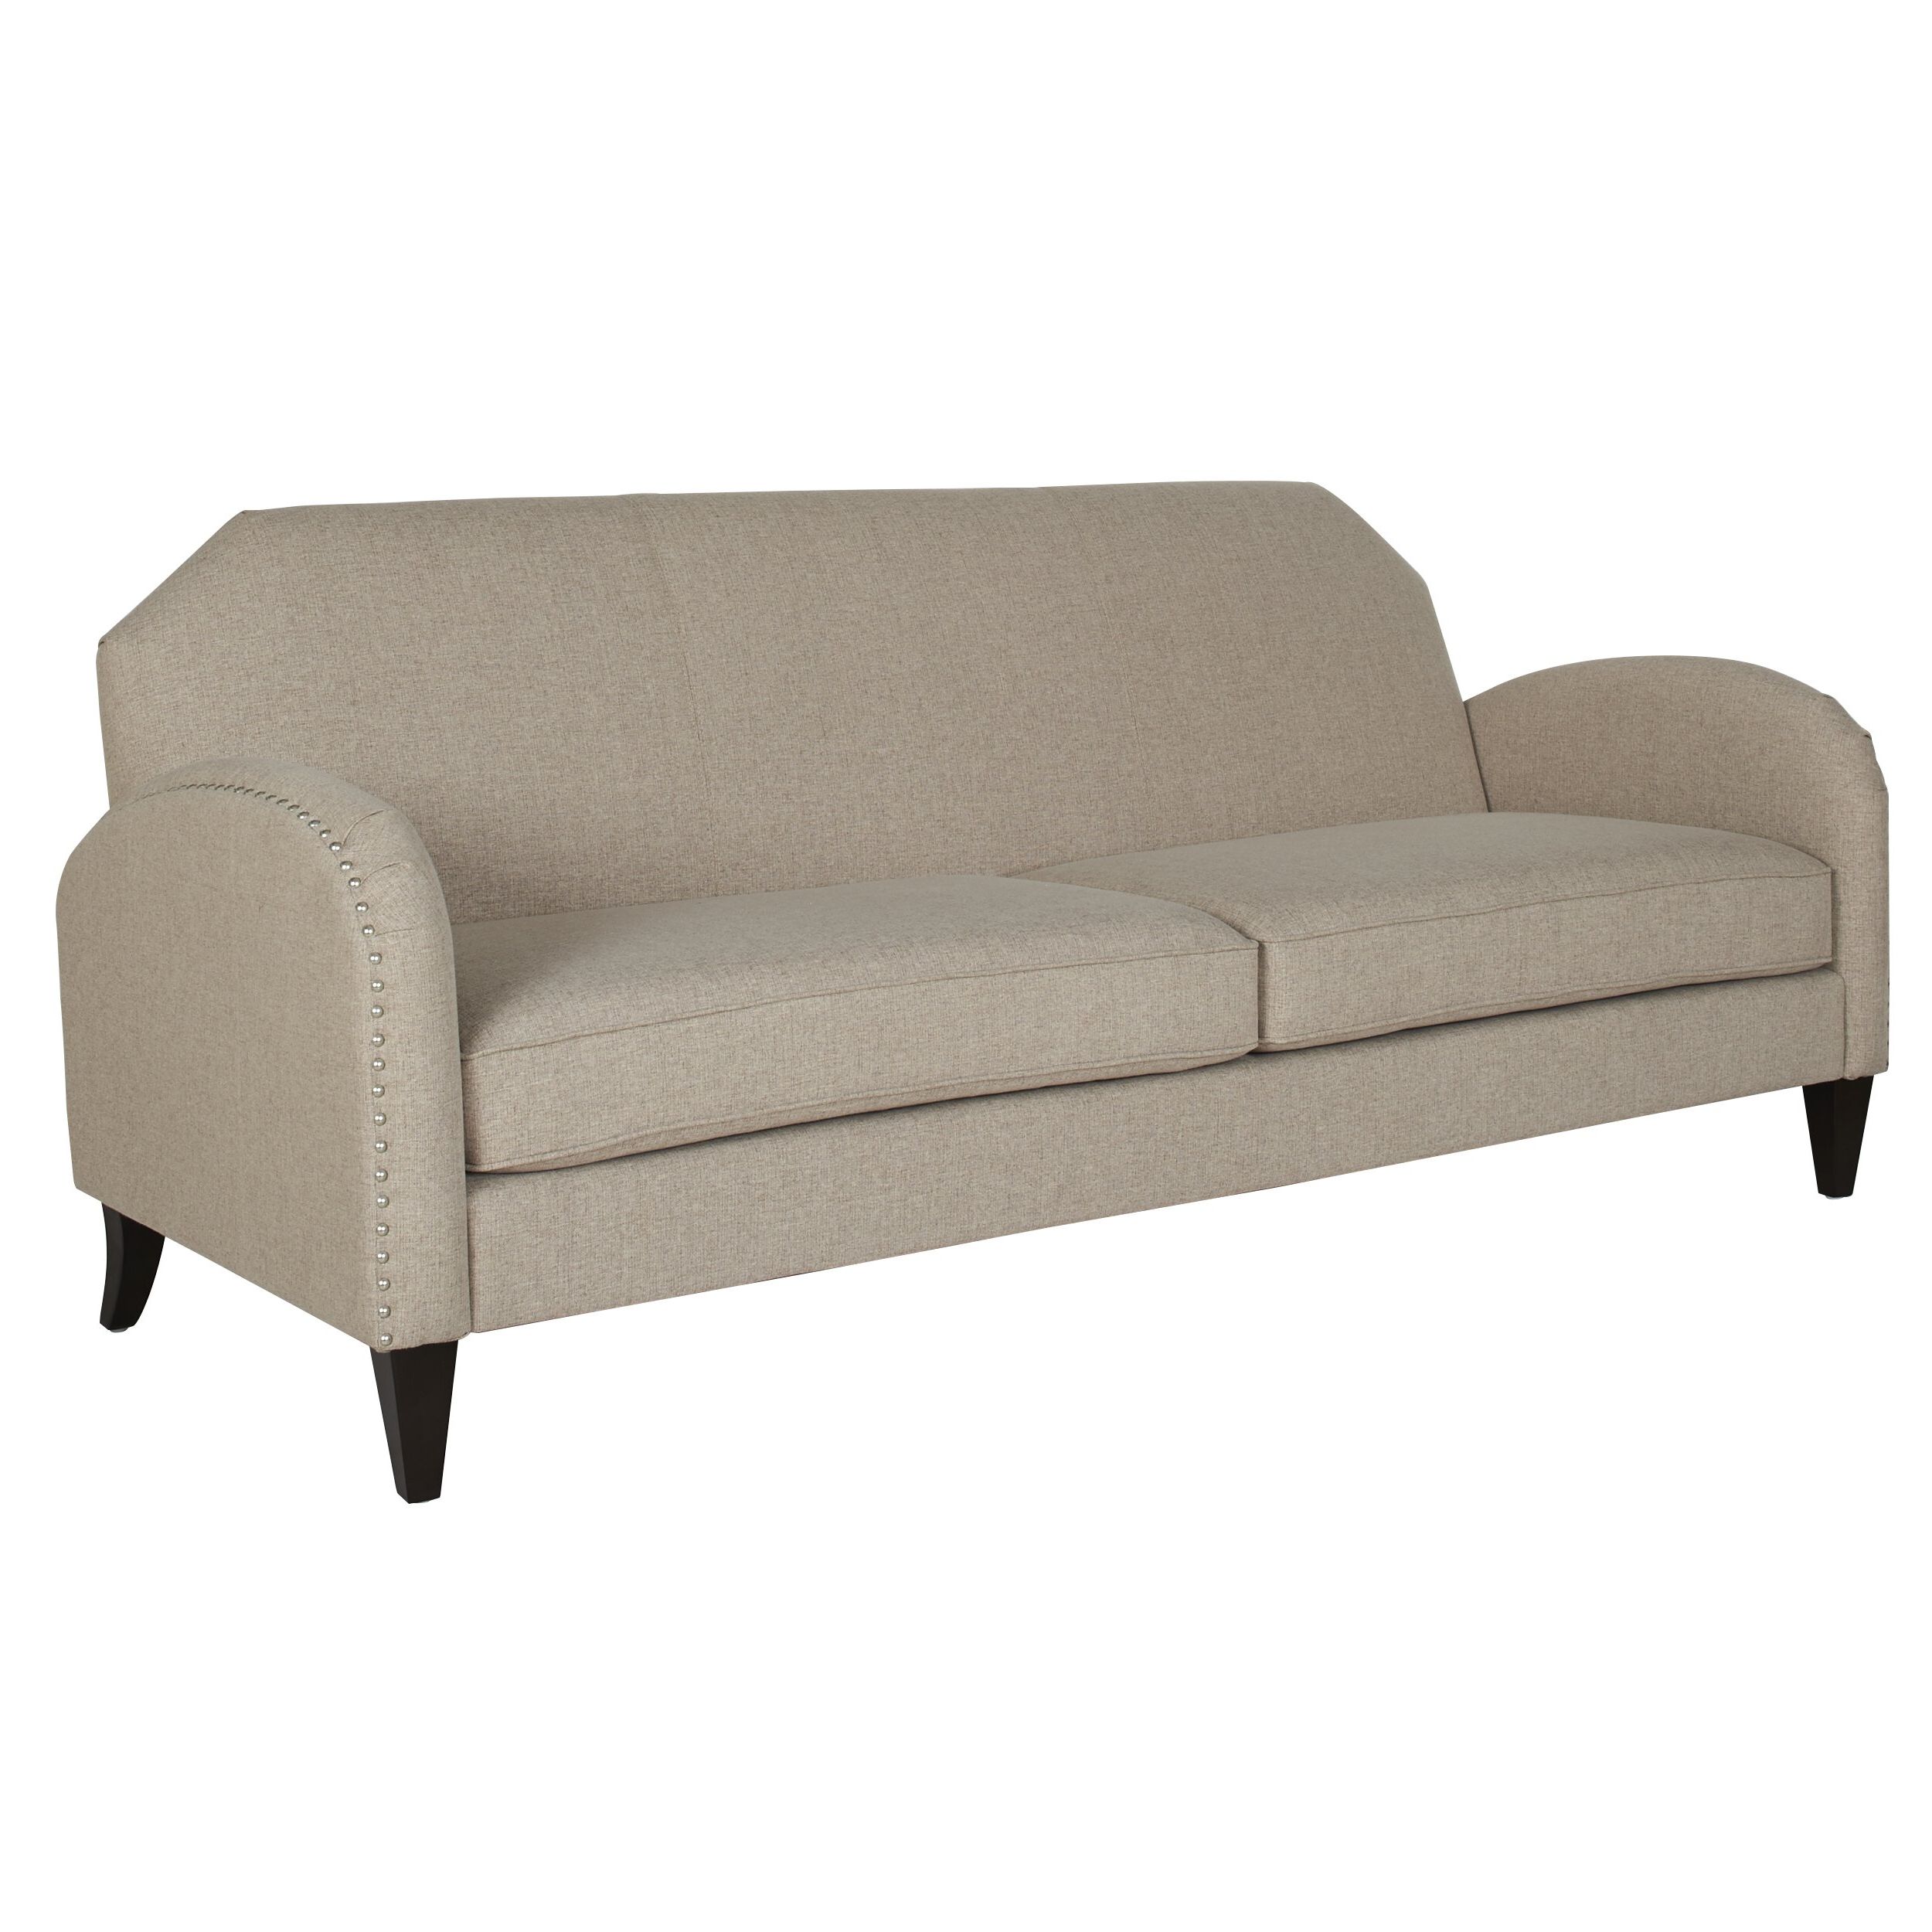 Darby Home Co Ella Unique Curved Arm Sofa | Wayfair Regarding Sofas With Curved Arms (Gallery 1 of 20)